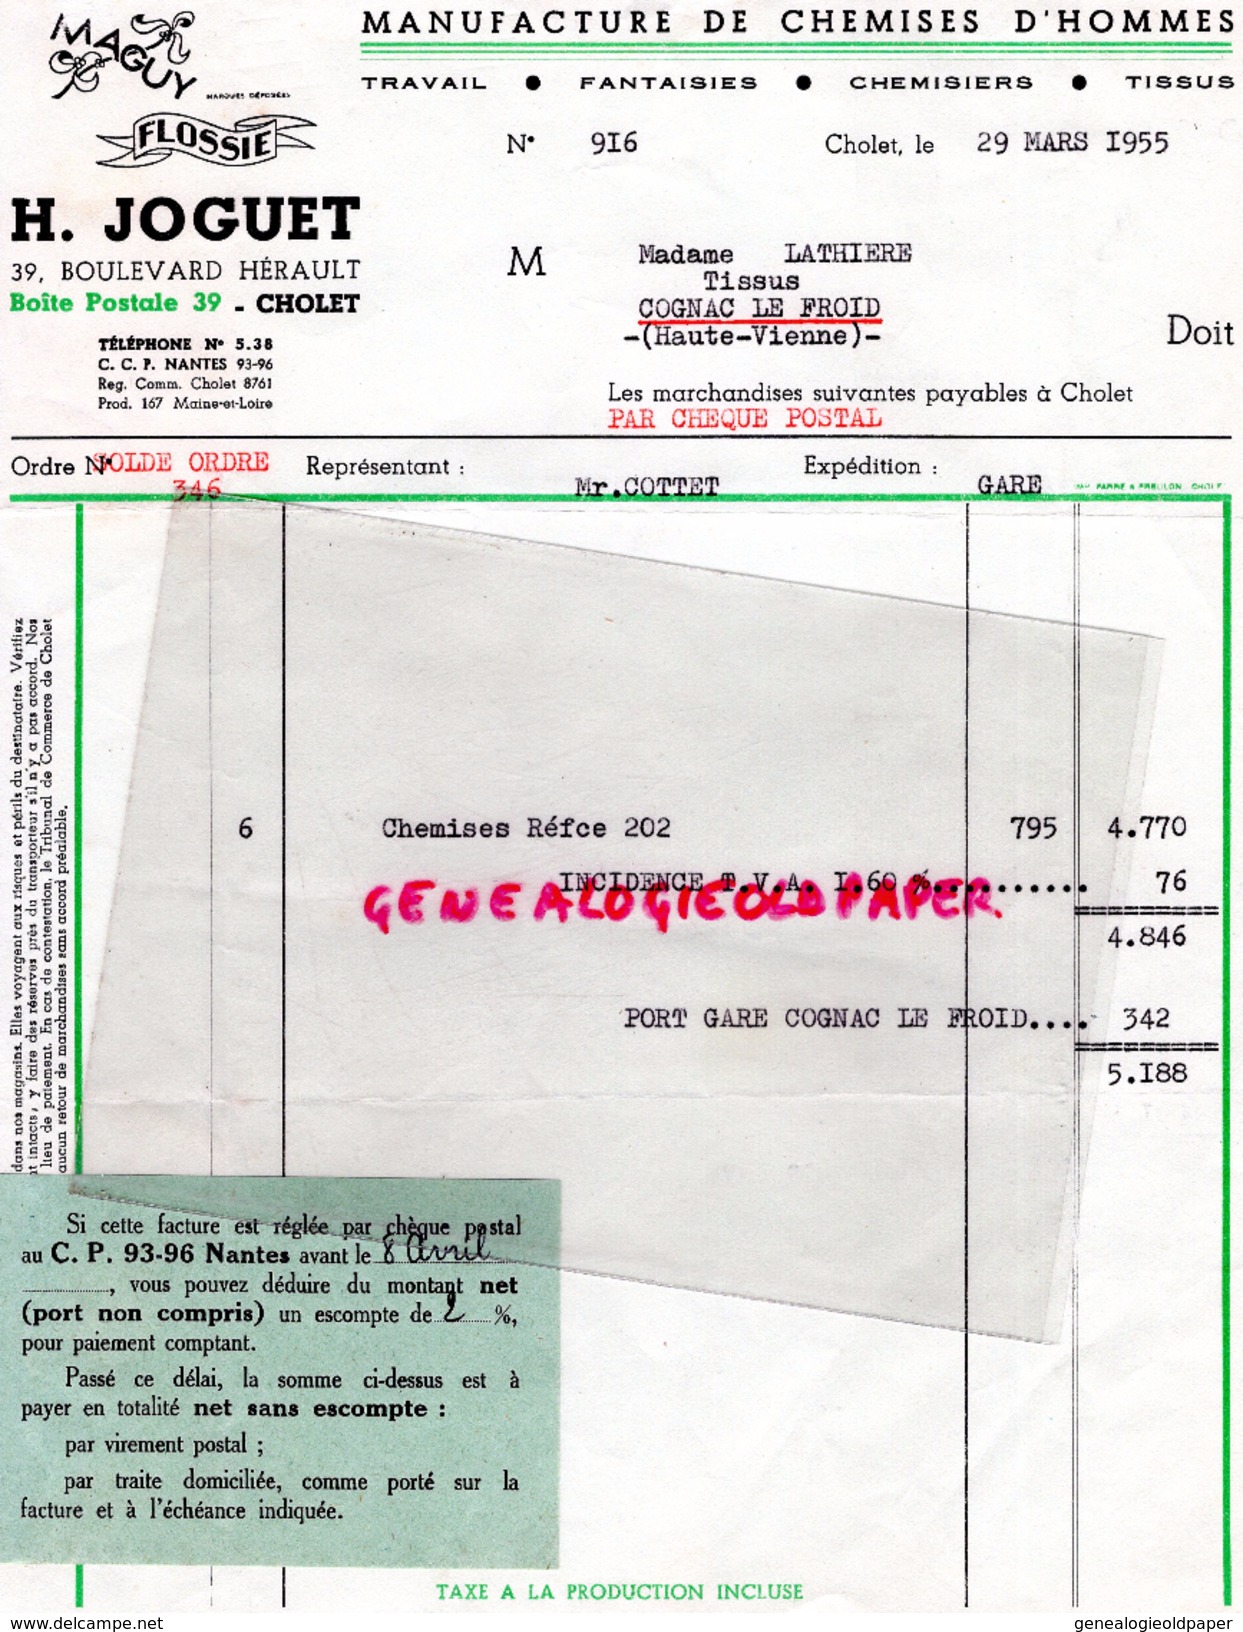 49 - ANGERS-FACTURE H. JOGUET - MANUFACTURE CHEMISES D' HOMMES- MAGUY-FLOSSIE- 39 BD.HERAULT- 1955 - 1950 - ...